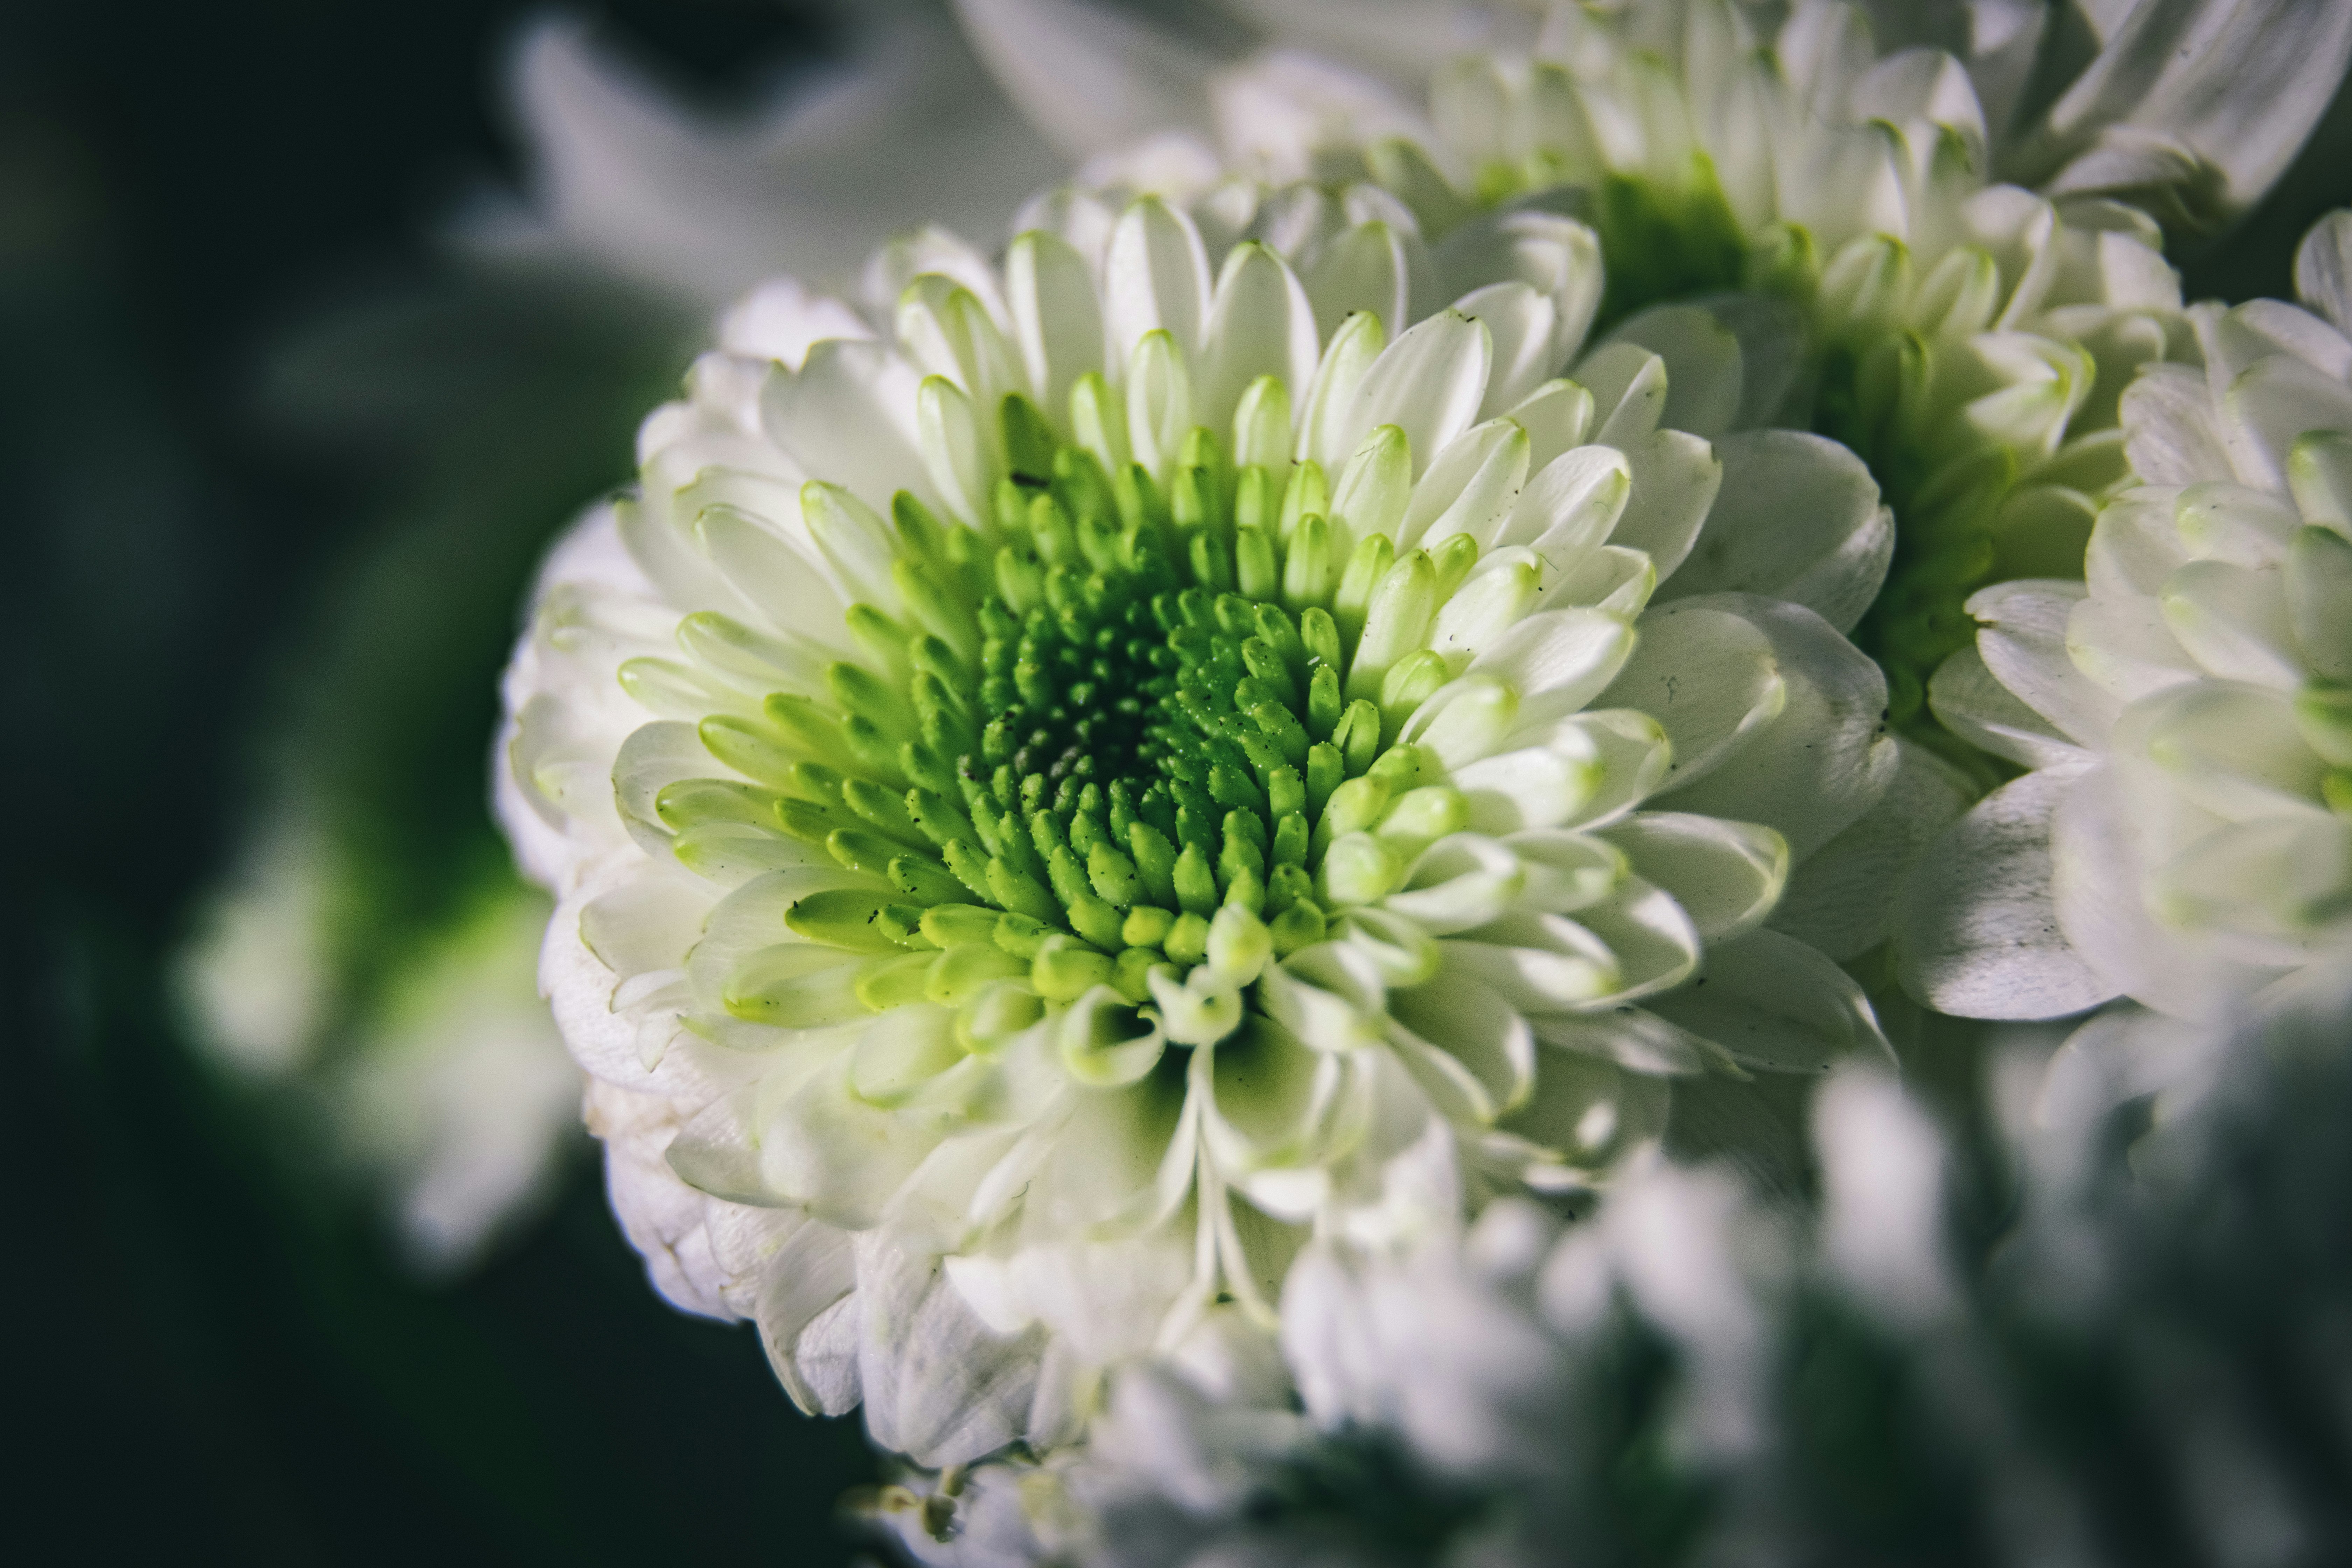 white and green flower in close up photography